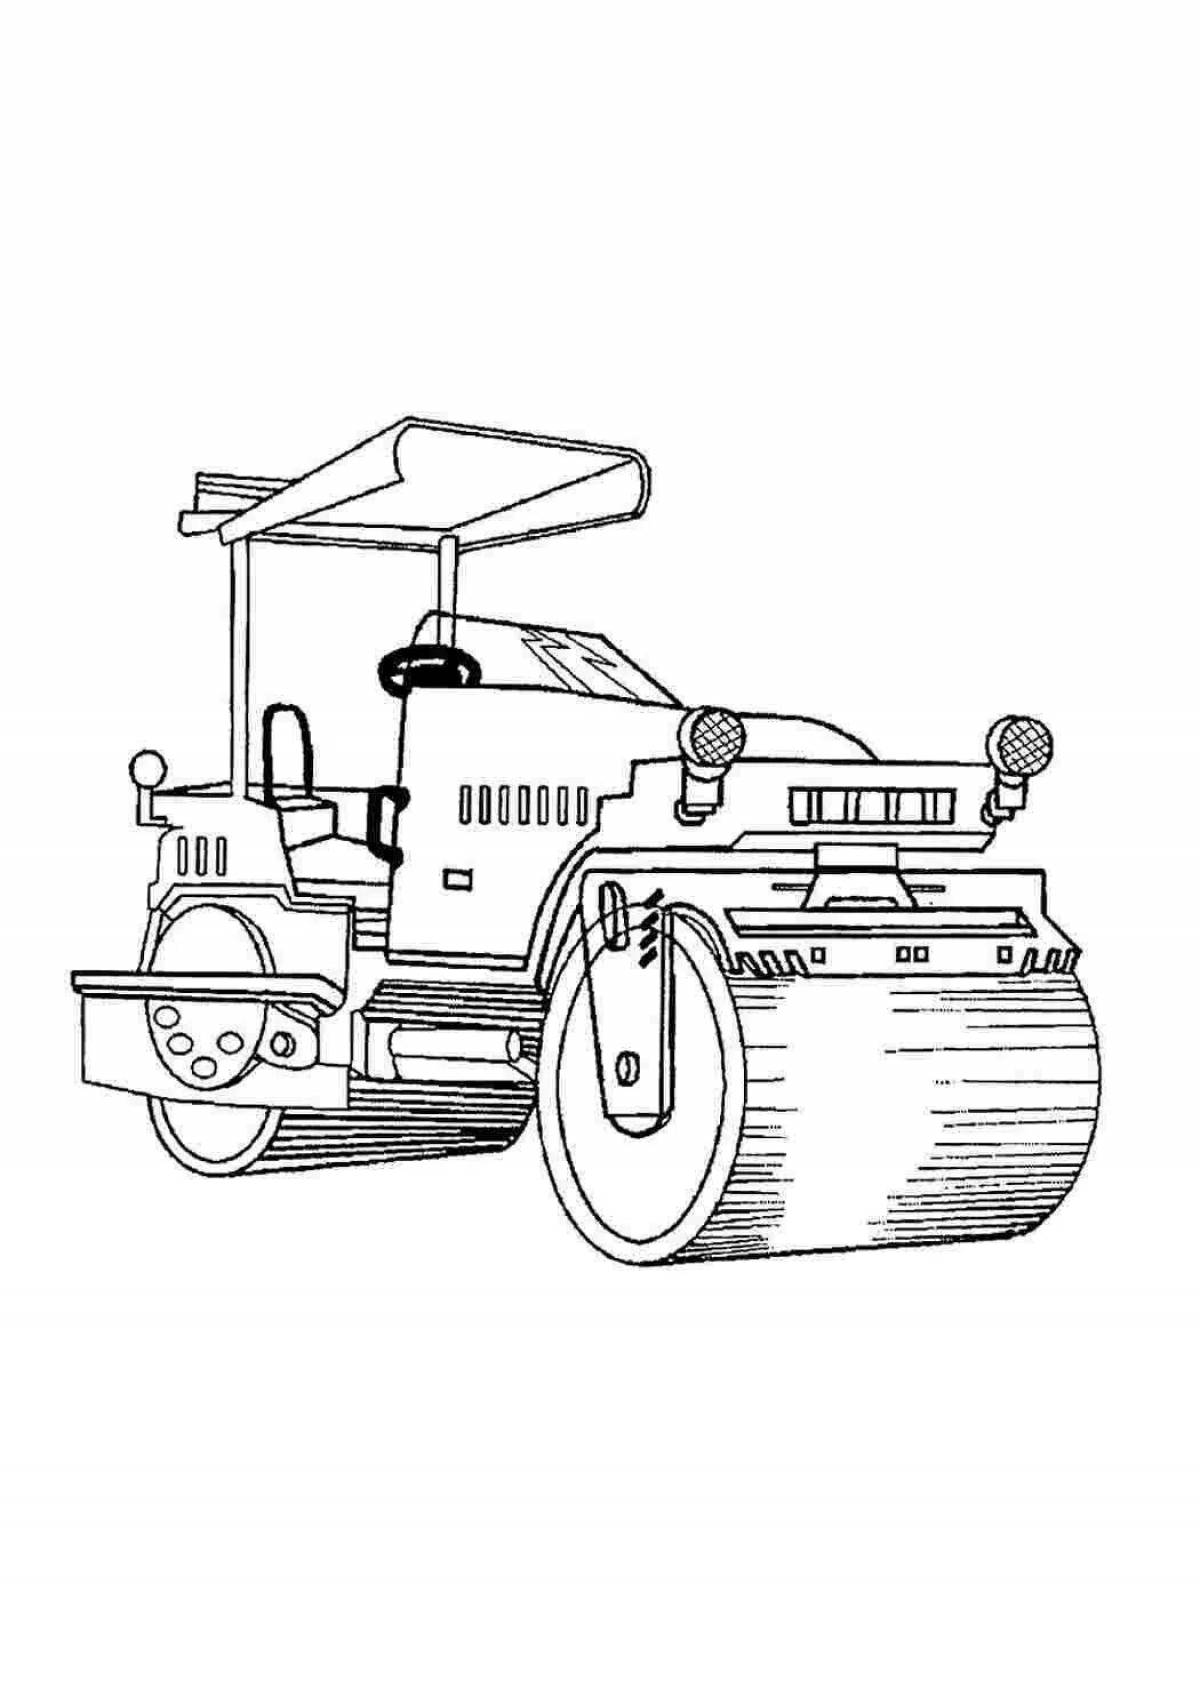 Great construction machinery coloring book